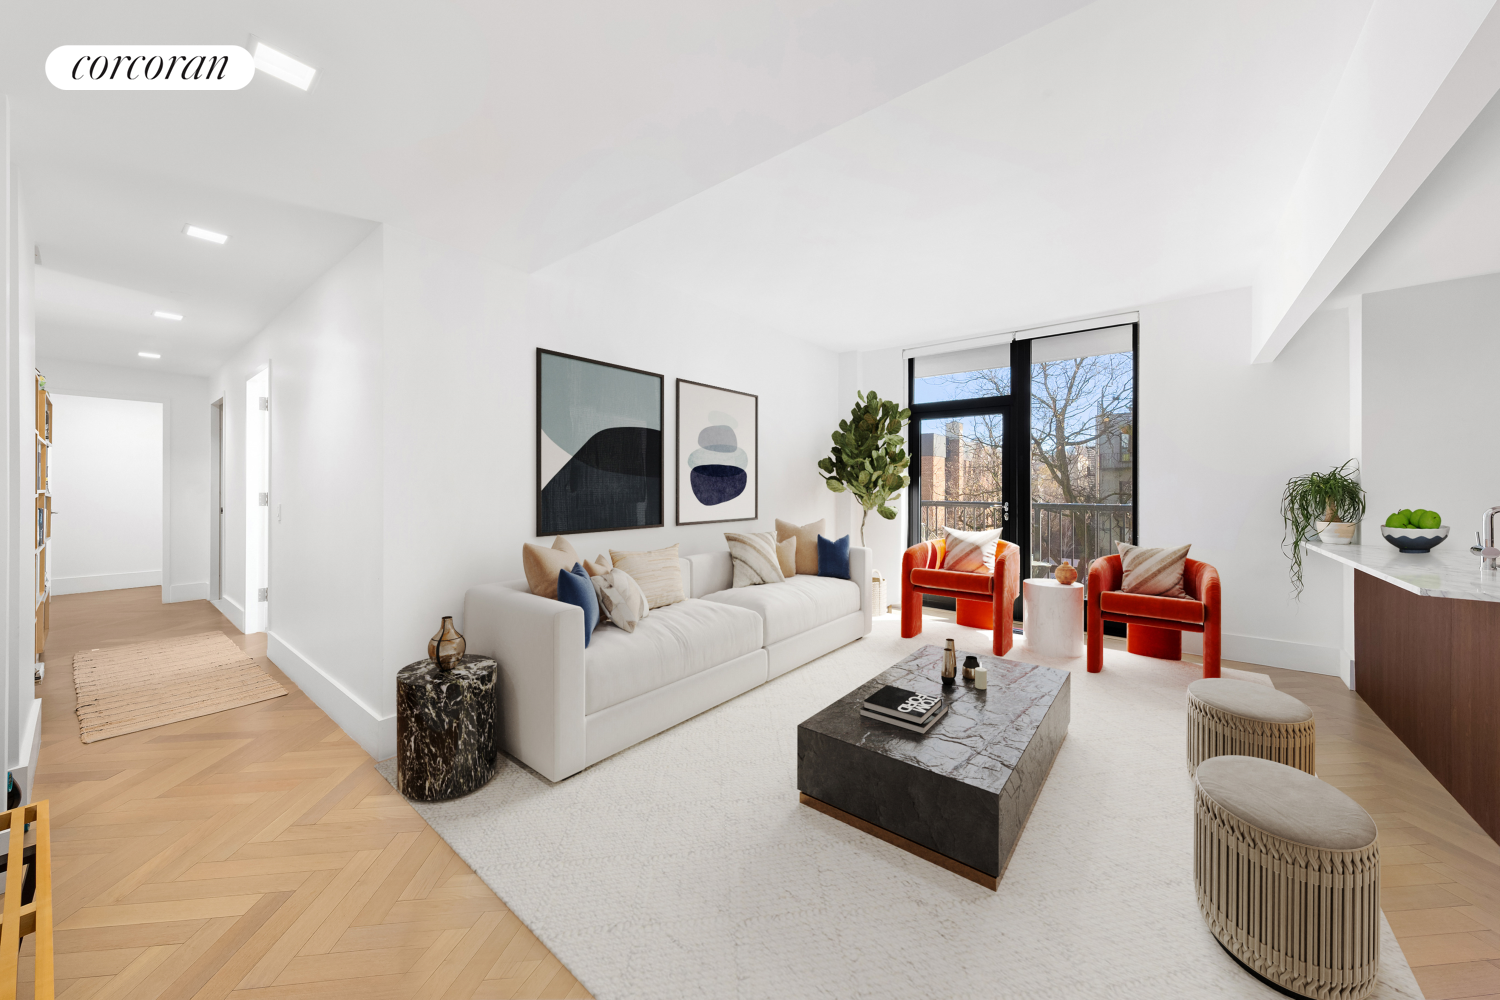 100 Ave A 4D, East Village, Downtown, NYC - 2 Bedrooms  
2 Bathrooms  
4 Rooms - 